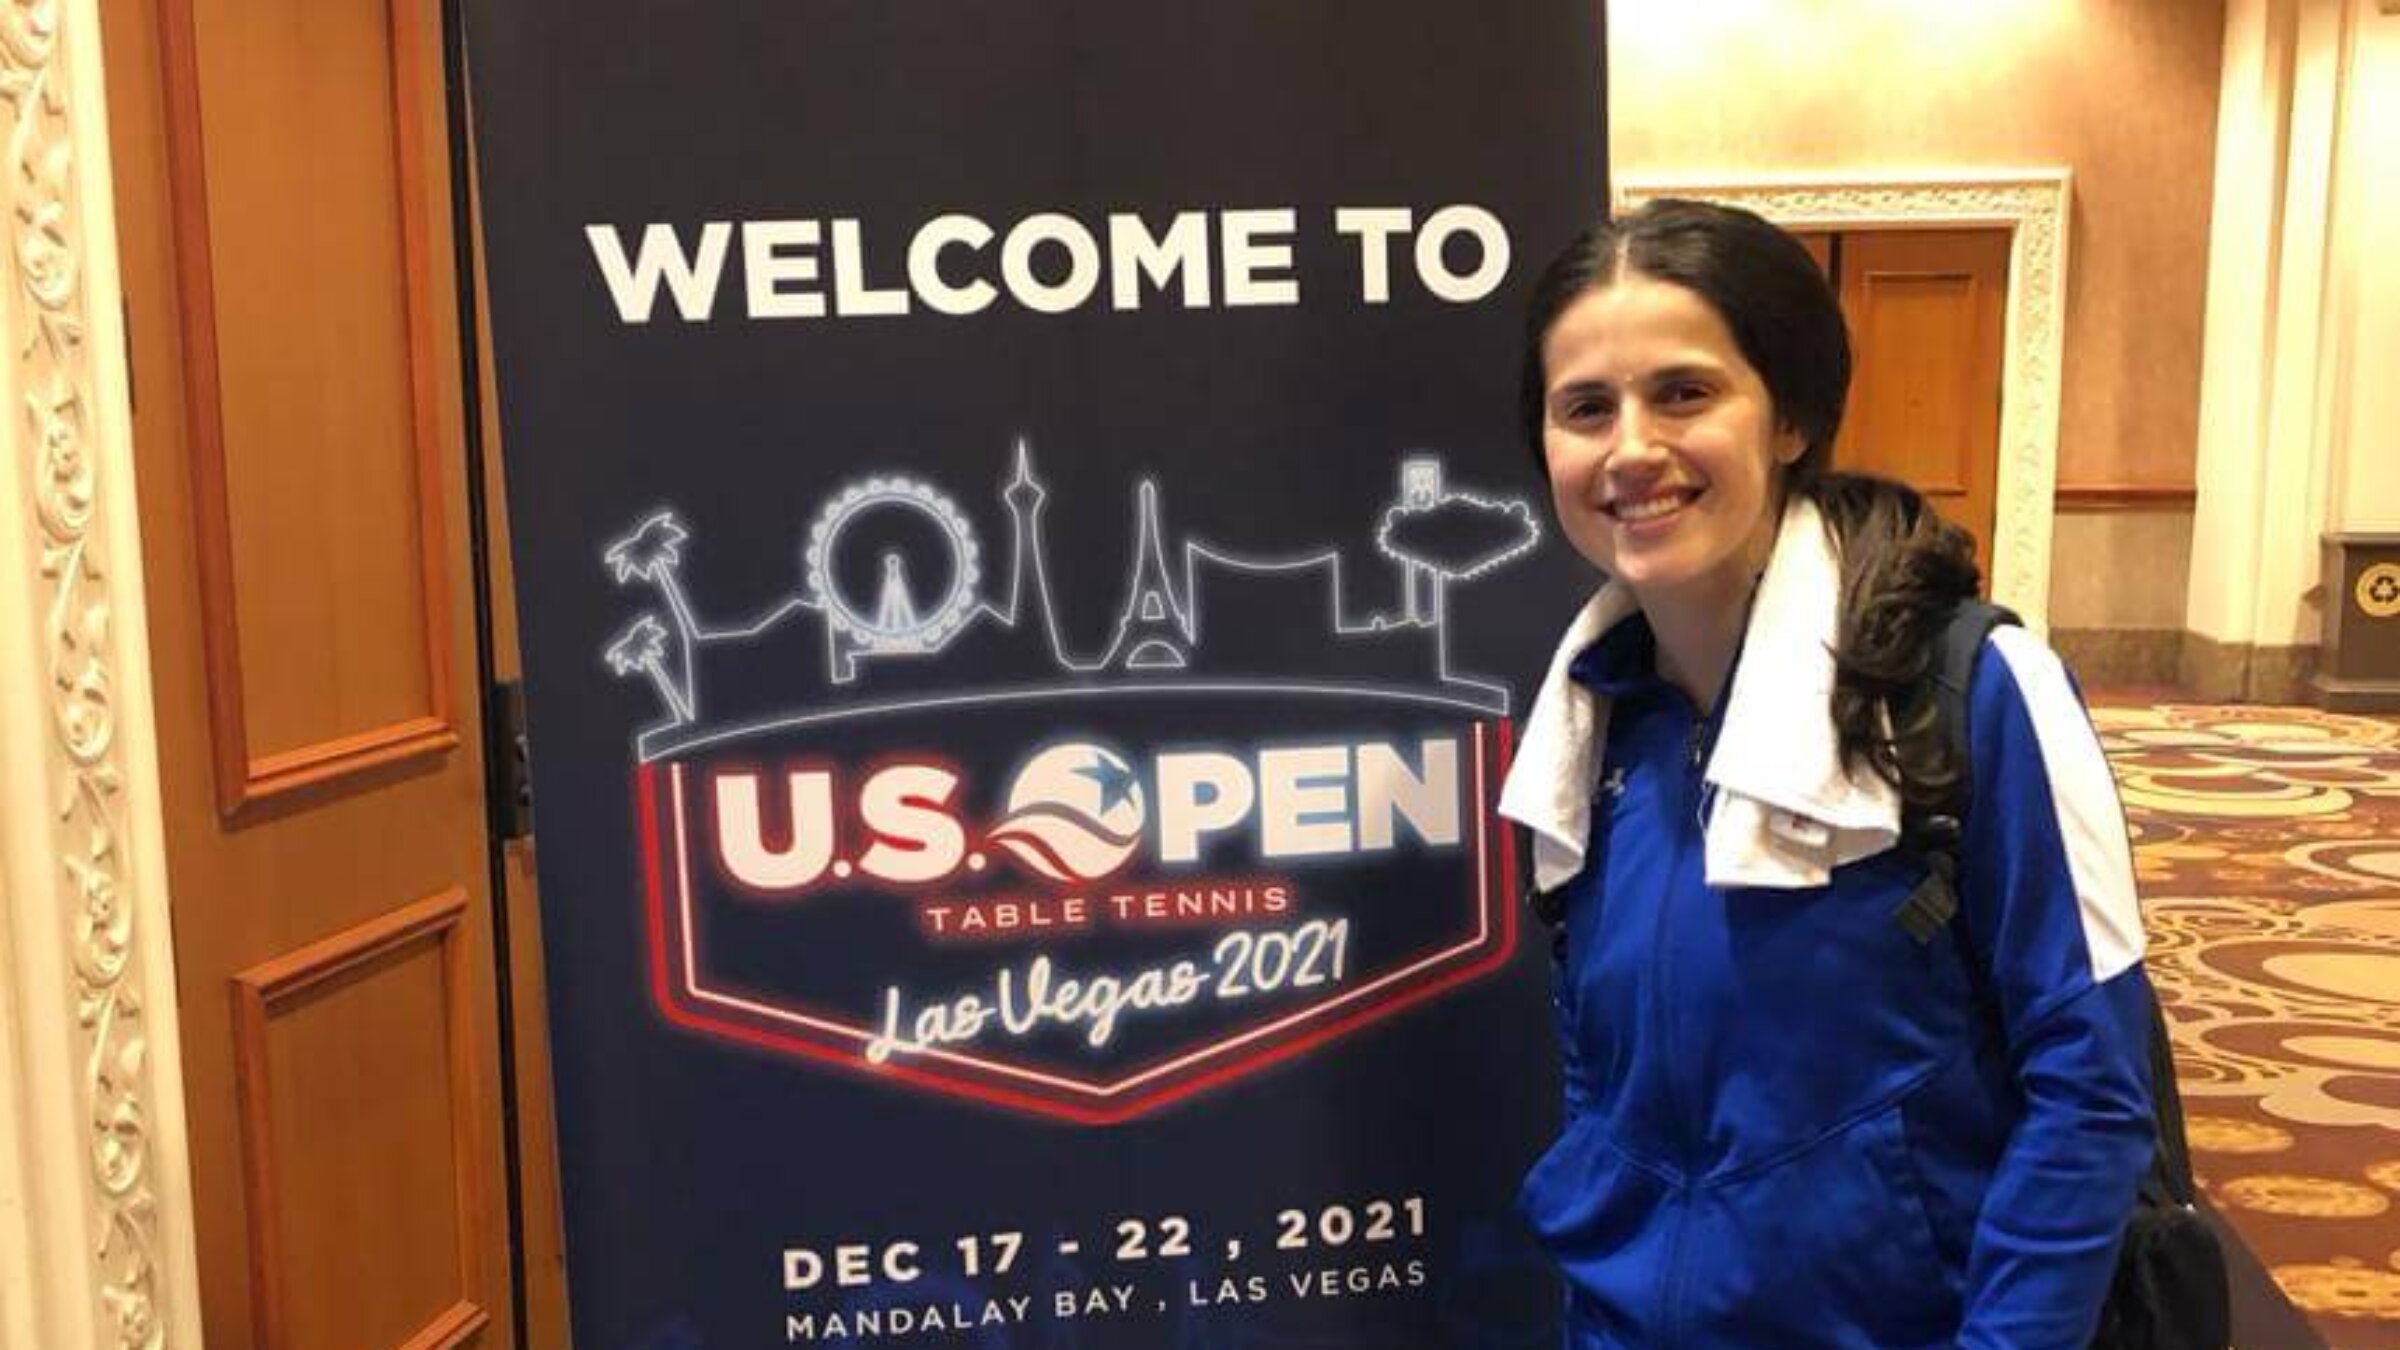 Estee Ackerman, an Orthodox ping-pong champ, at Las Vegas'
US Open Table Tennis tournament in 2021